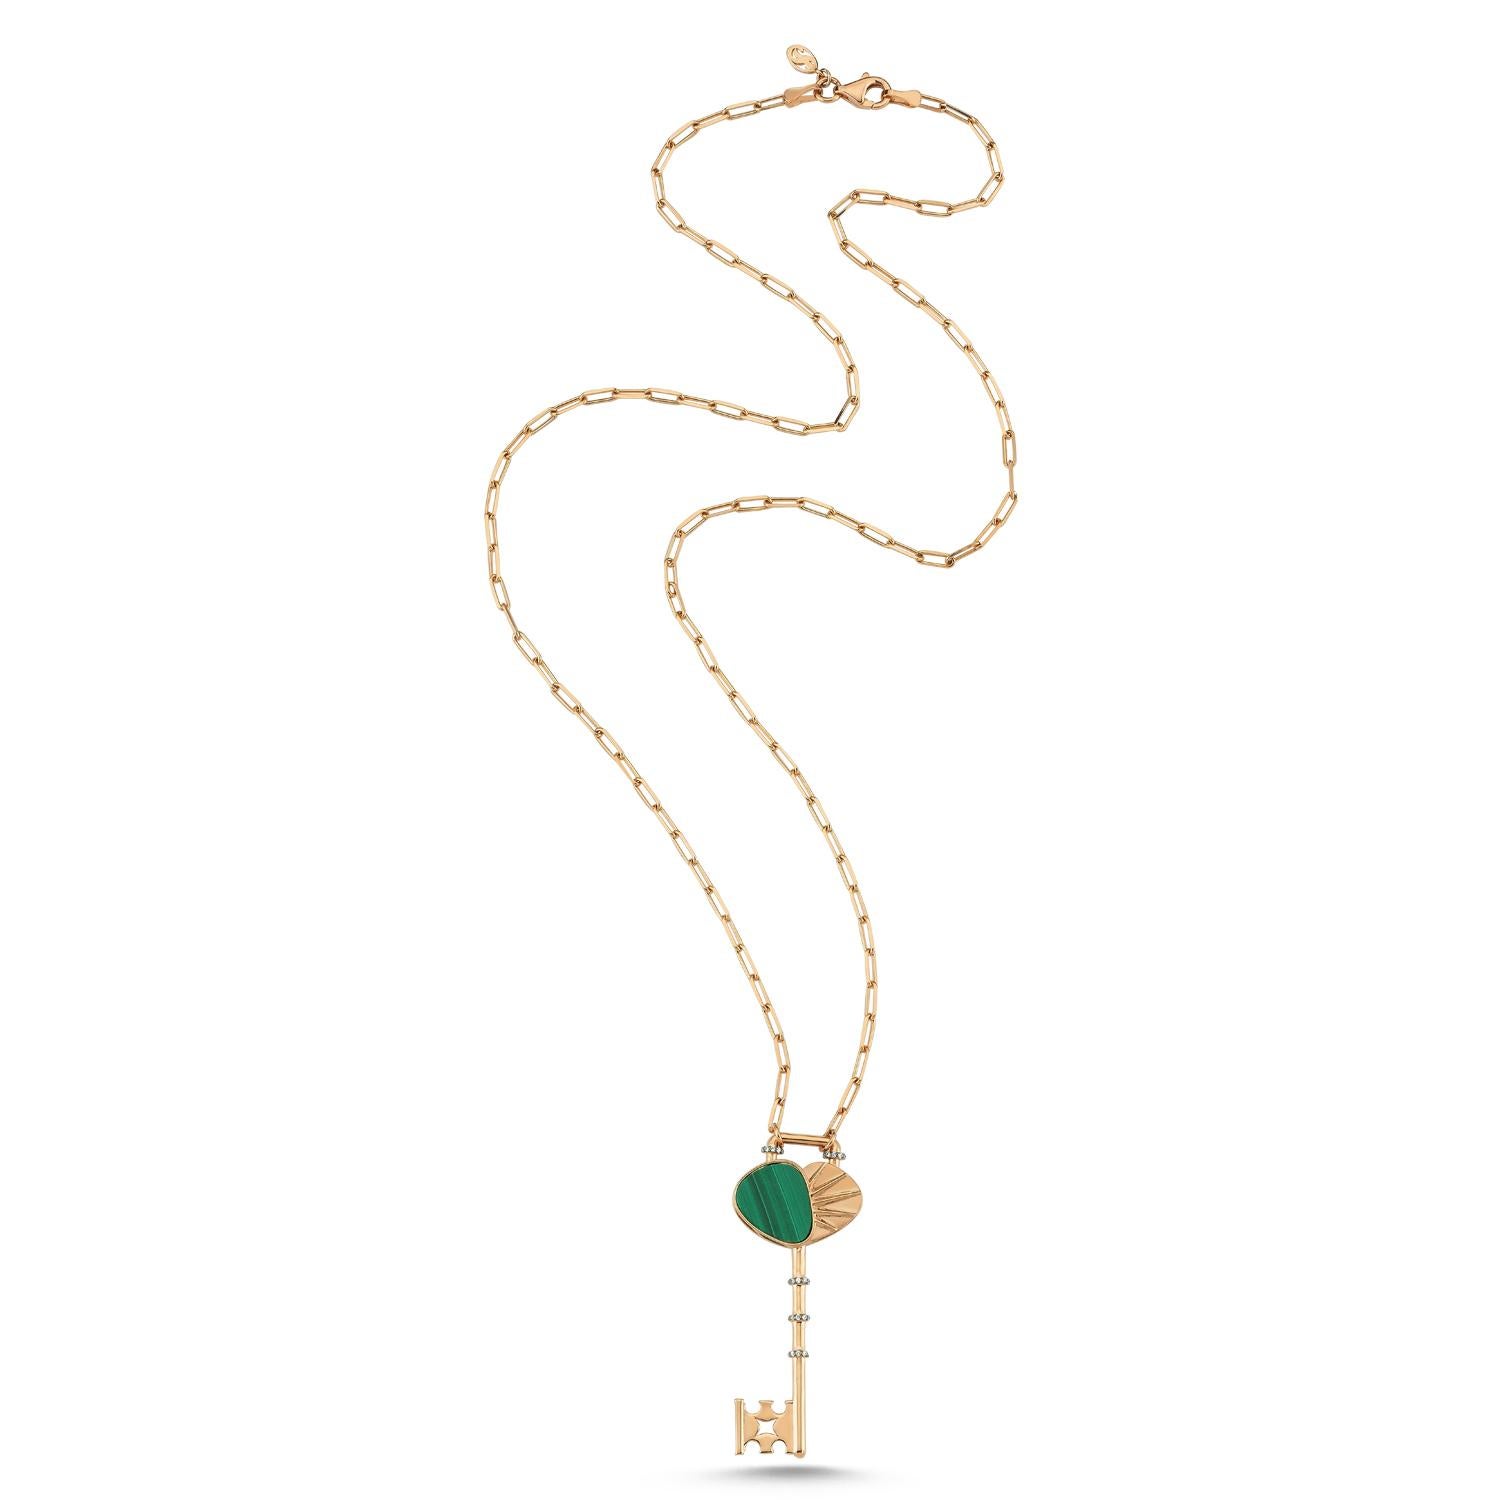 The Treasures of The Sea Collection is inspired by the water element which represents the treasures and natural stones hidden in the depths of the sea.

Hestia Necklace in Rose Gold with Malachite and White Diamond by Selda Jewellery

Additional